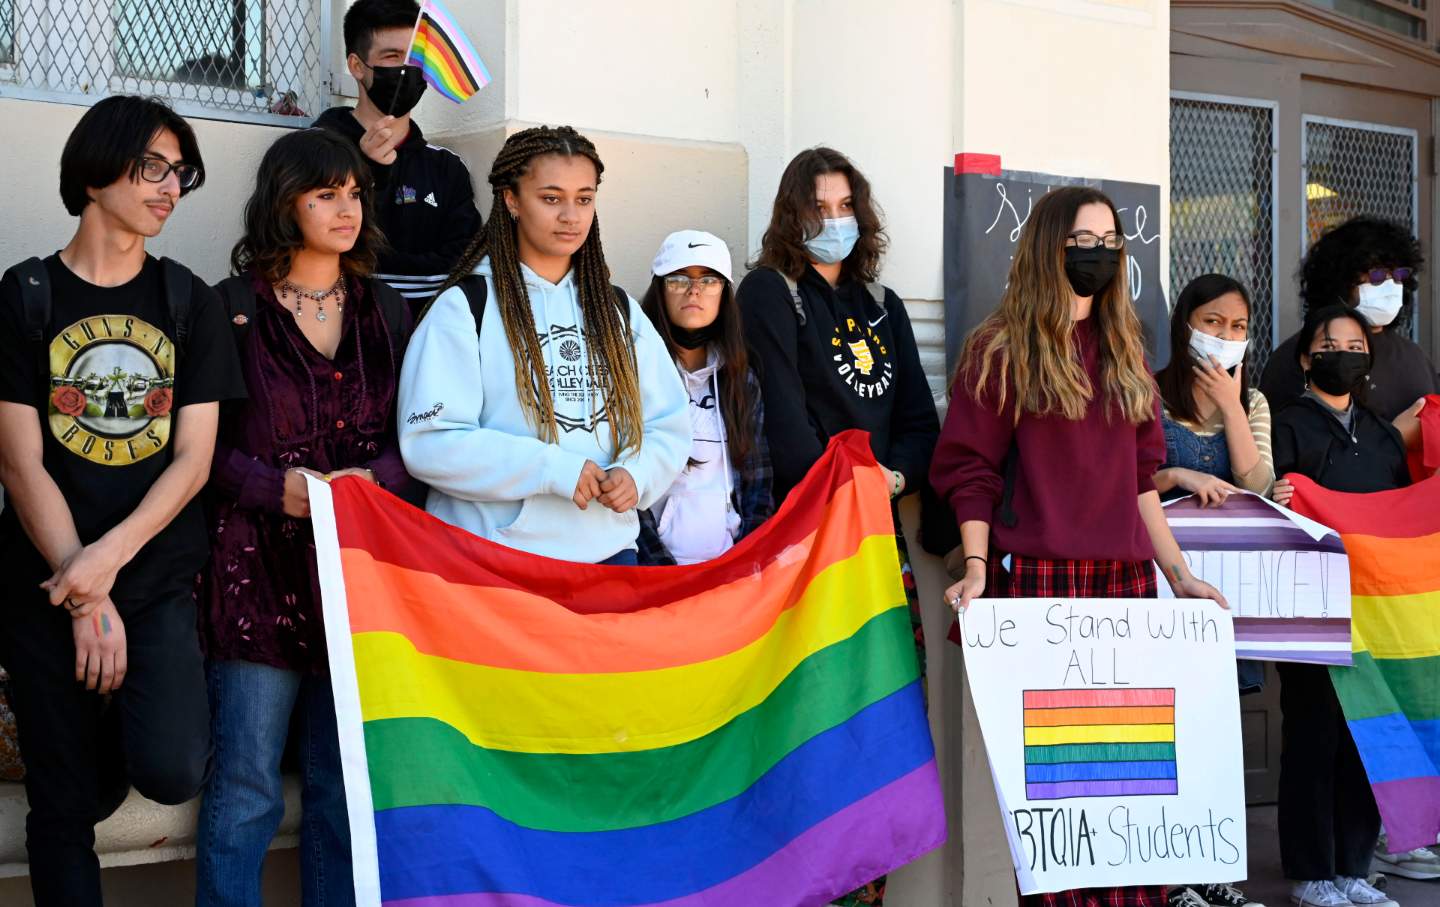 Students stand with pride flags